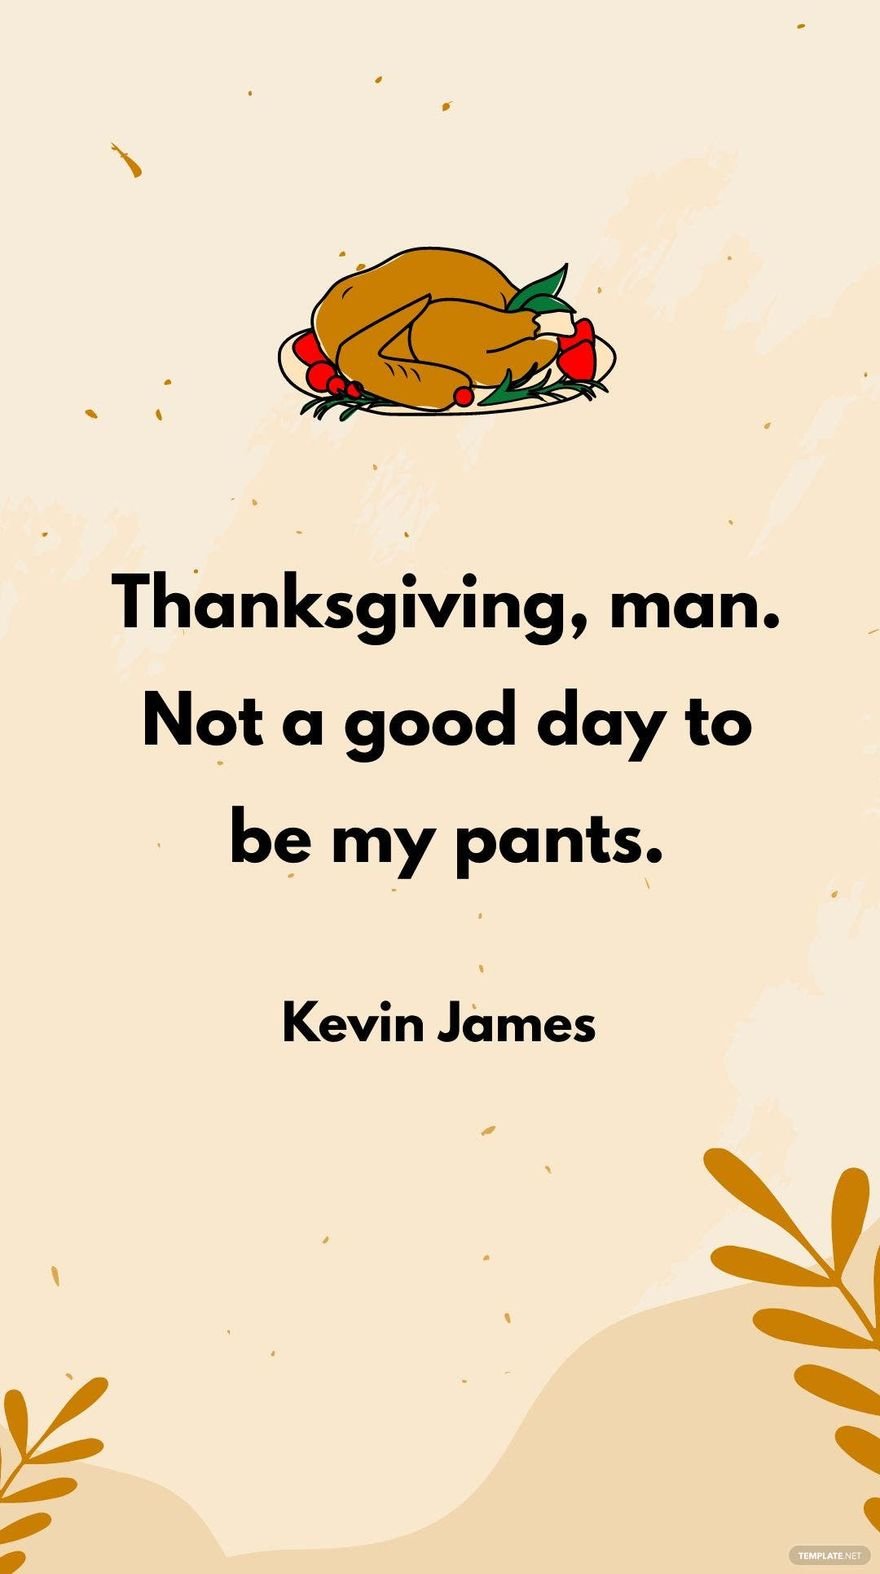 Free Kevin James - Thanksgiving, man. Not a good day to be my pants.